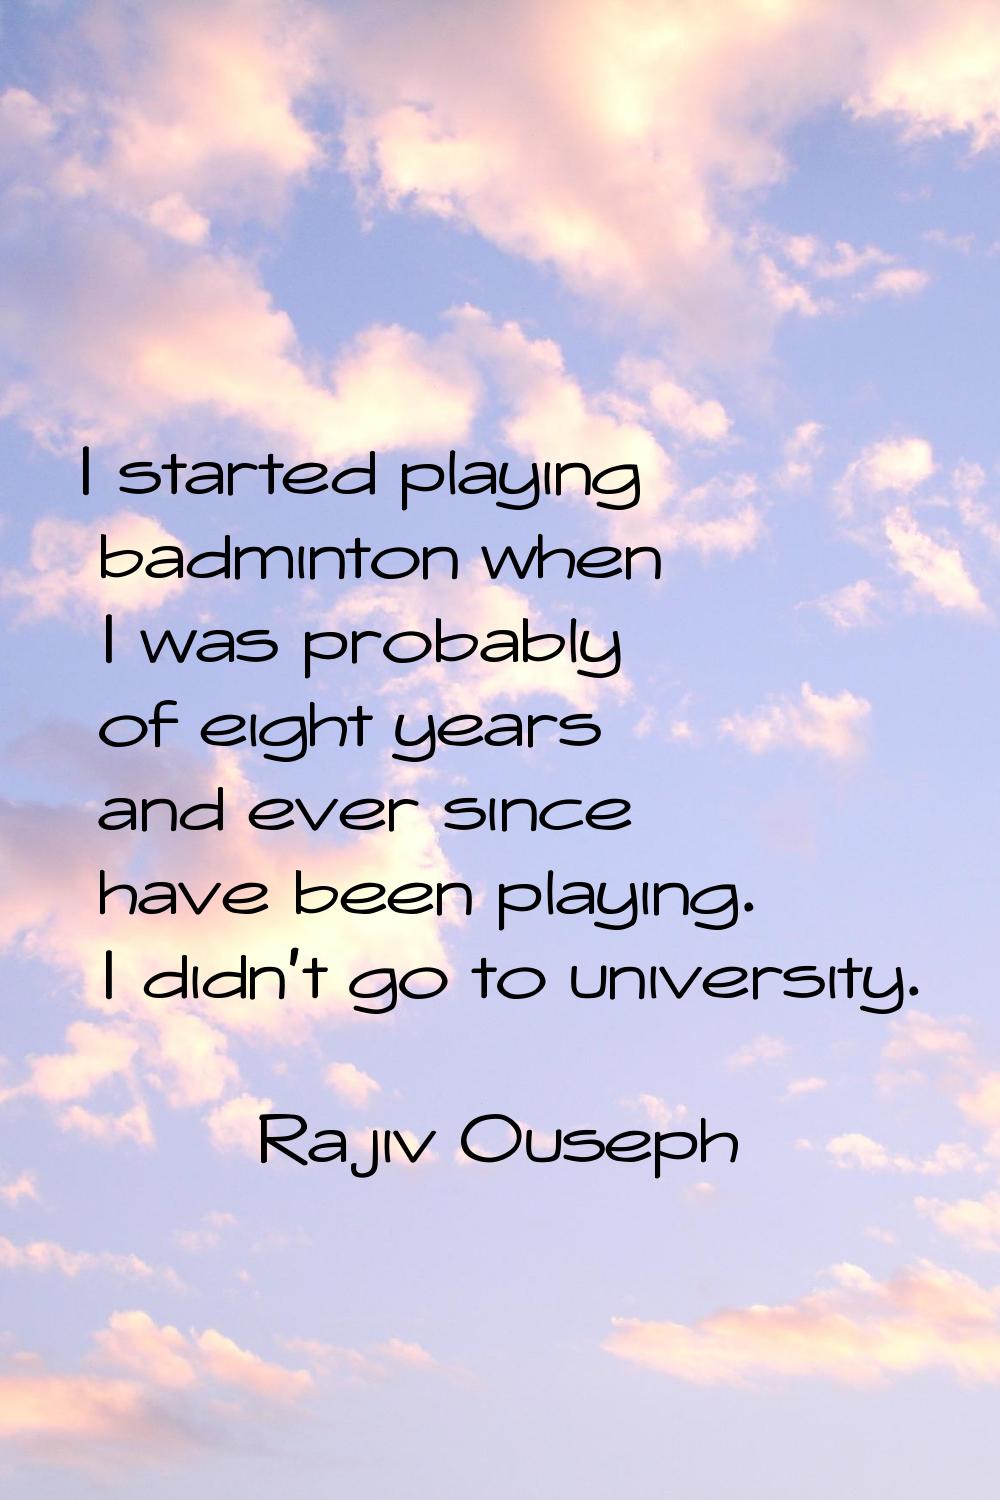 I started playing badminton when I was probably of eight years and ever since have been playing. I 